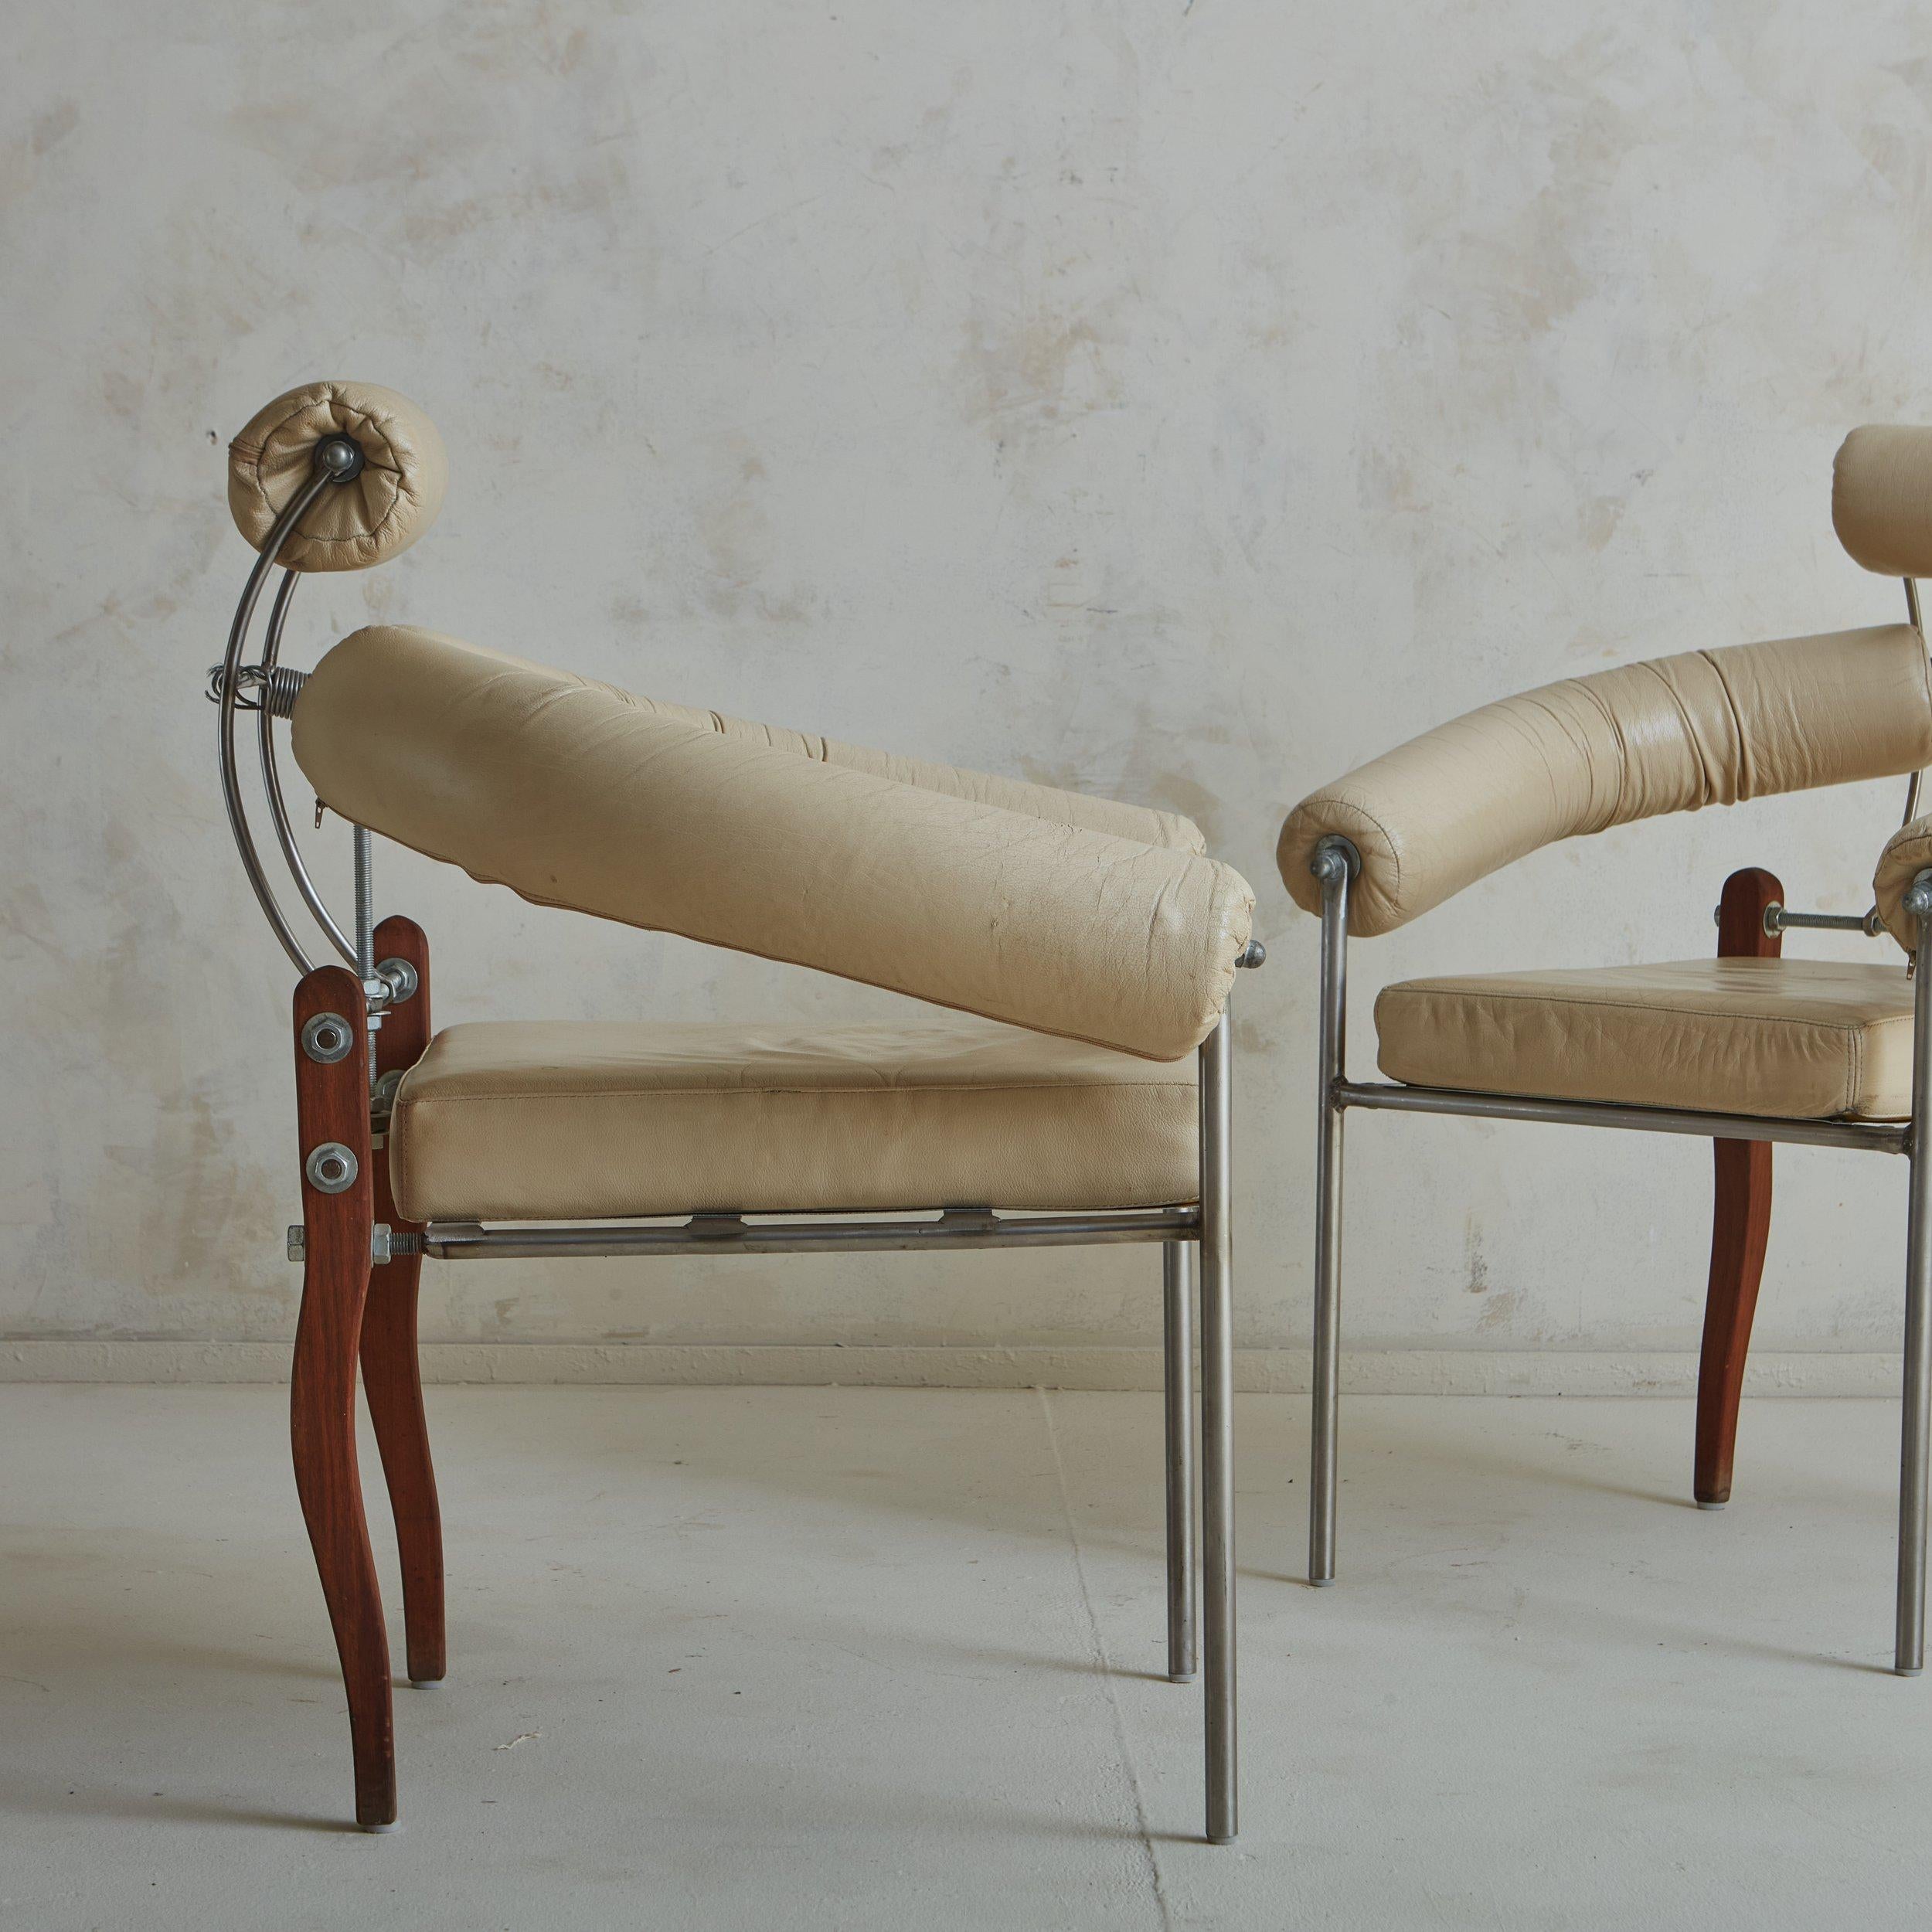 A pair of Swiss ‘Pirmin’ chairs designed by Heinz Julen in the 1990s. These sculptural chairs feature a variety of materials; they have industrial stainless steel frames with upholstered seats, arms and seat backs in original cream leather. The